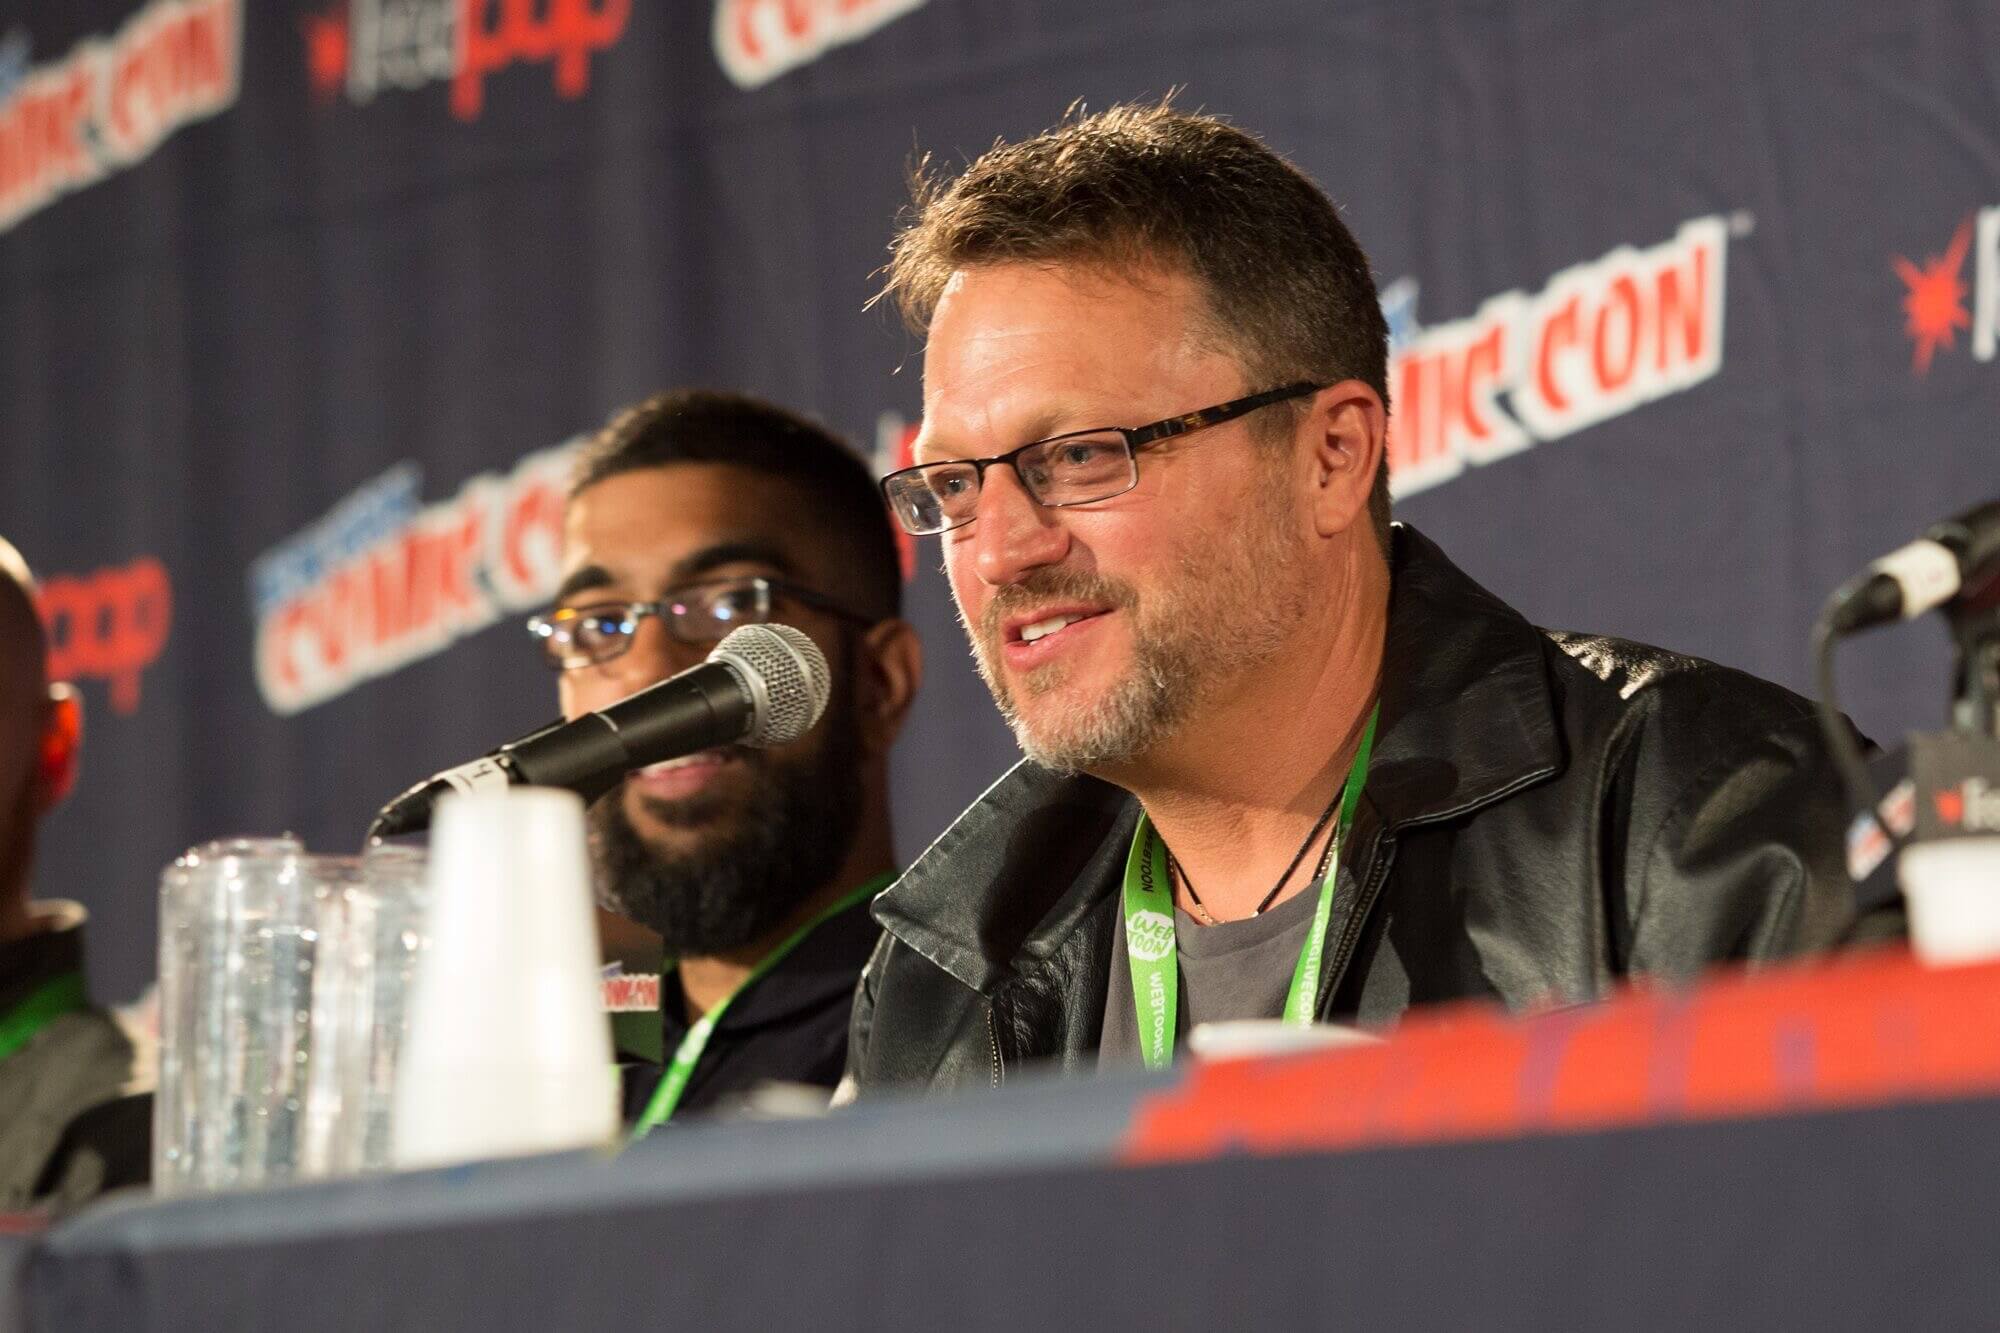 Steve Blum speaking at a panel at New York Comic Con